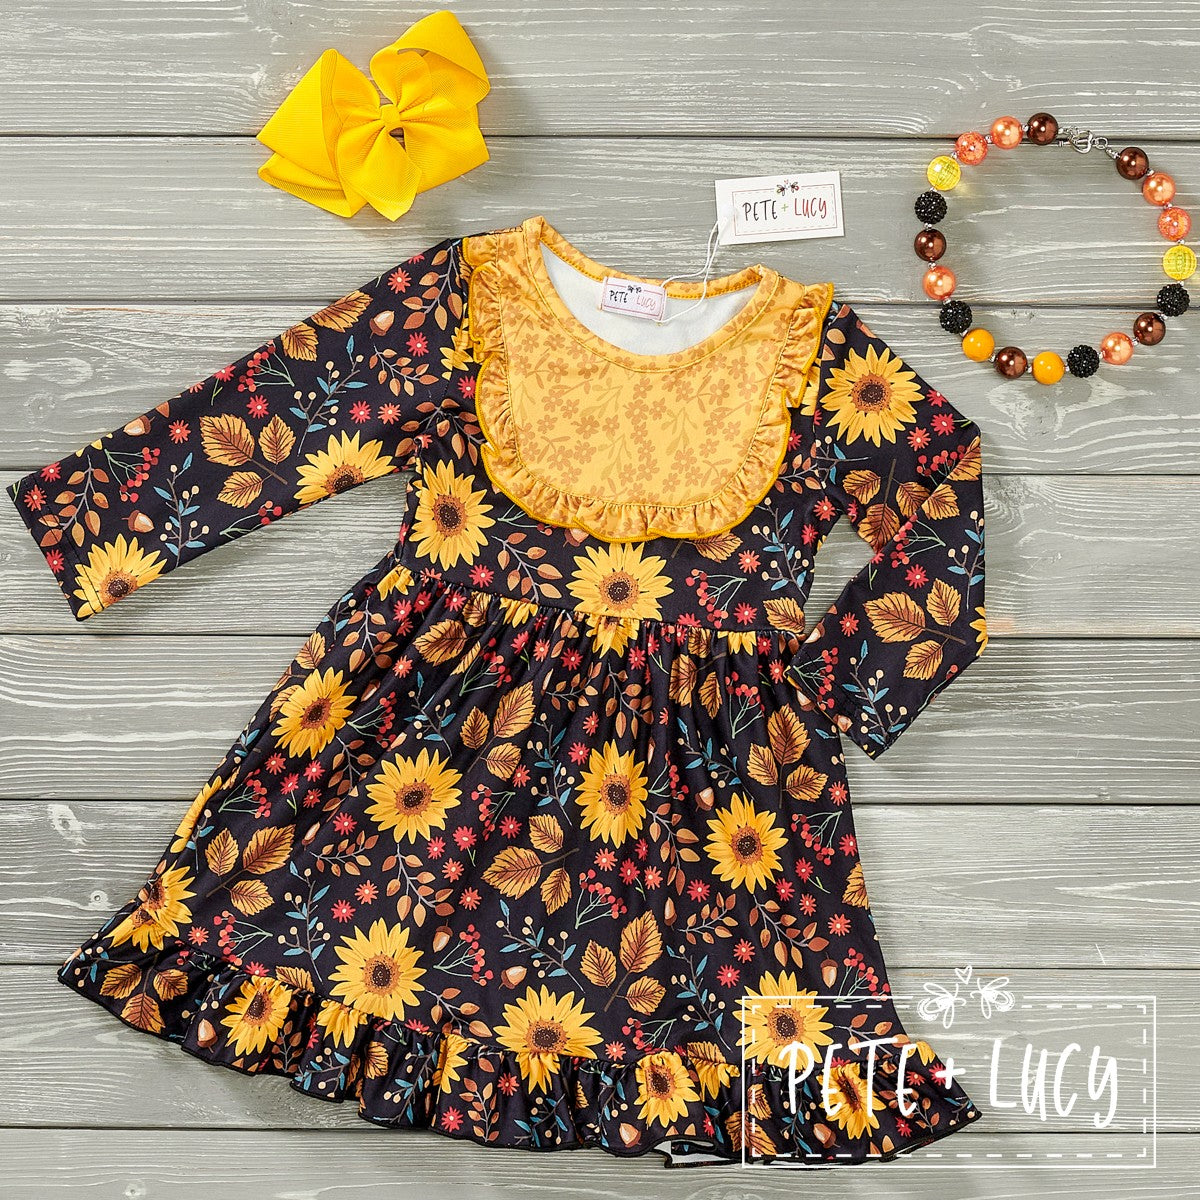 Dancing with Sunflowers Dress by Pete & Lucy